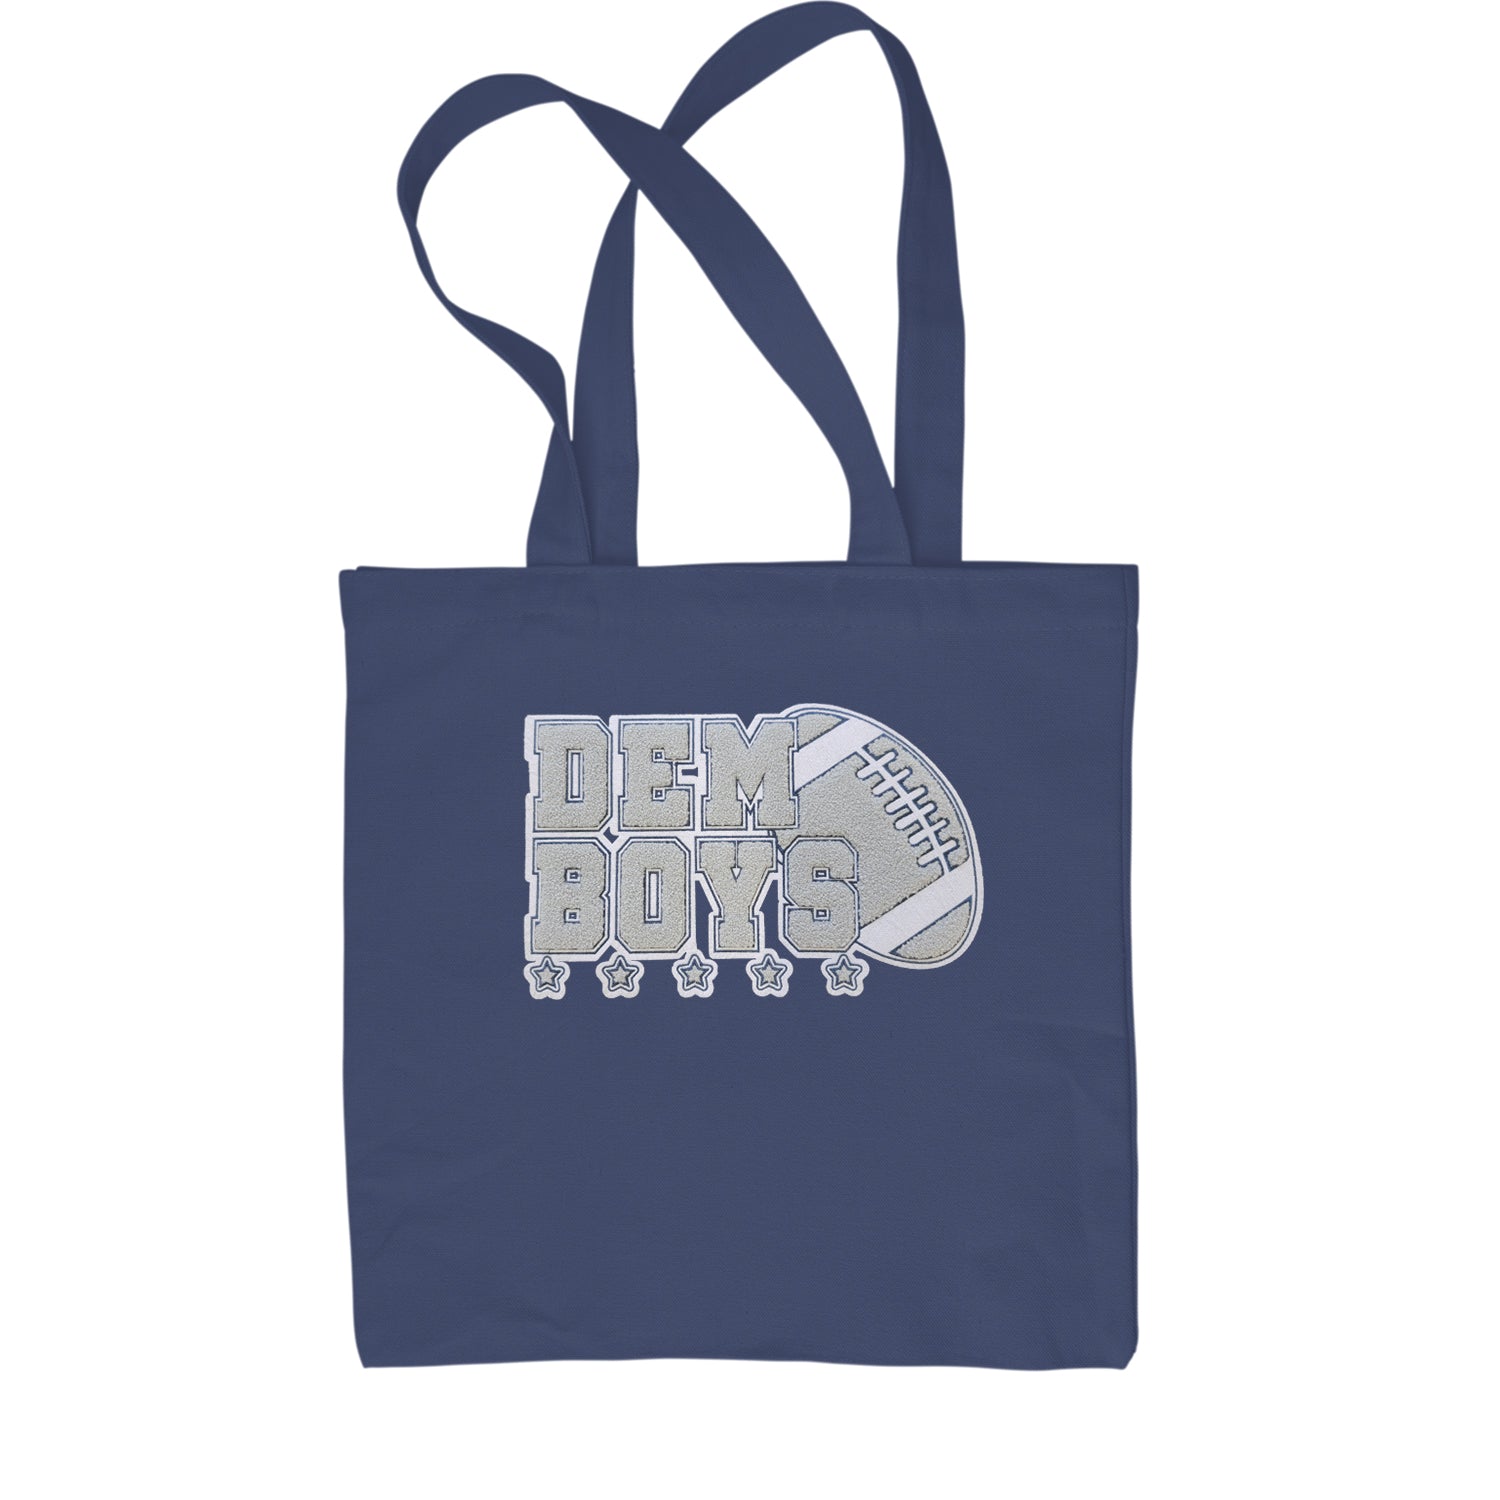 Dem Boys Embroidered Patch 2 Shopping Tote Bag dallas, fan, jersey, team, texas by Expression Tees